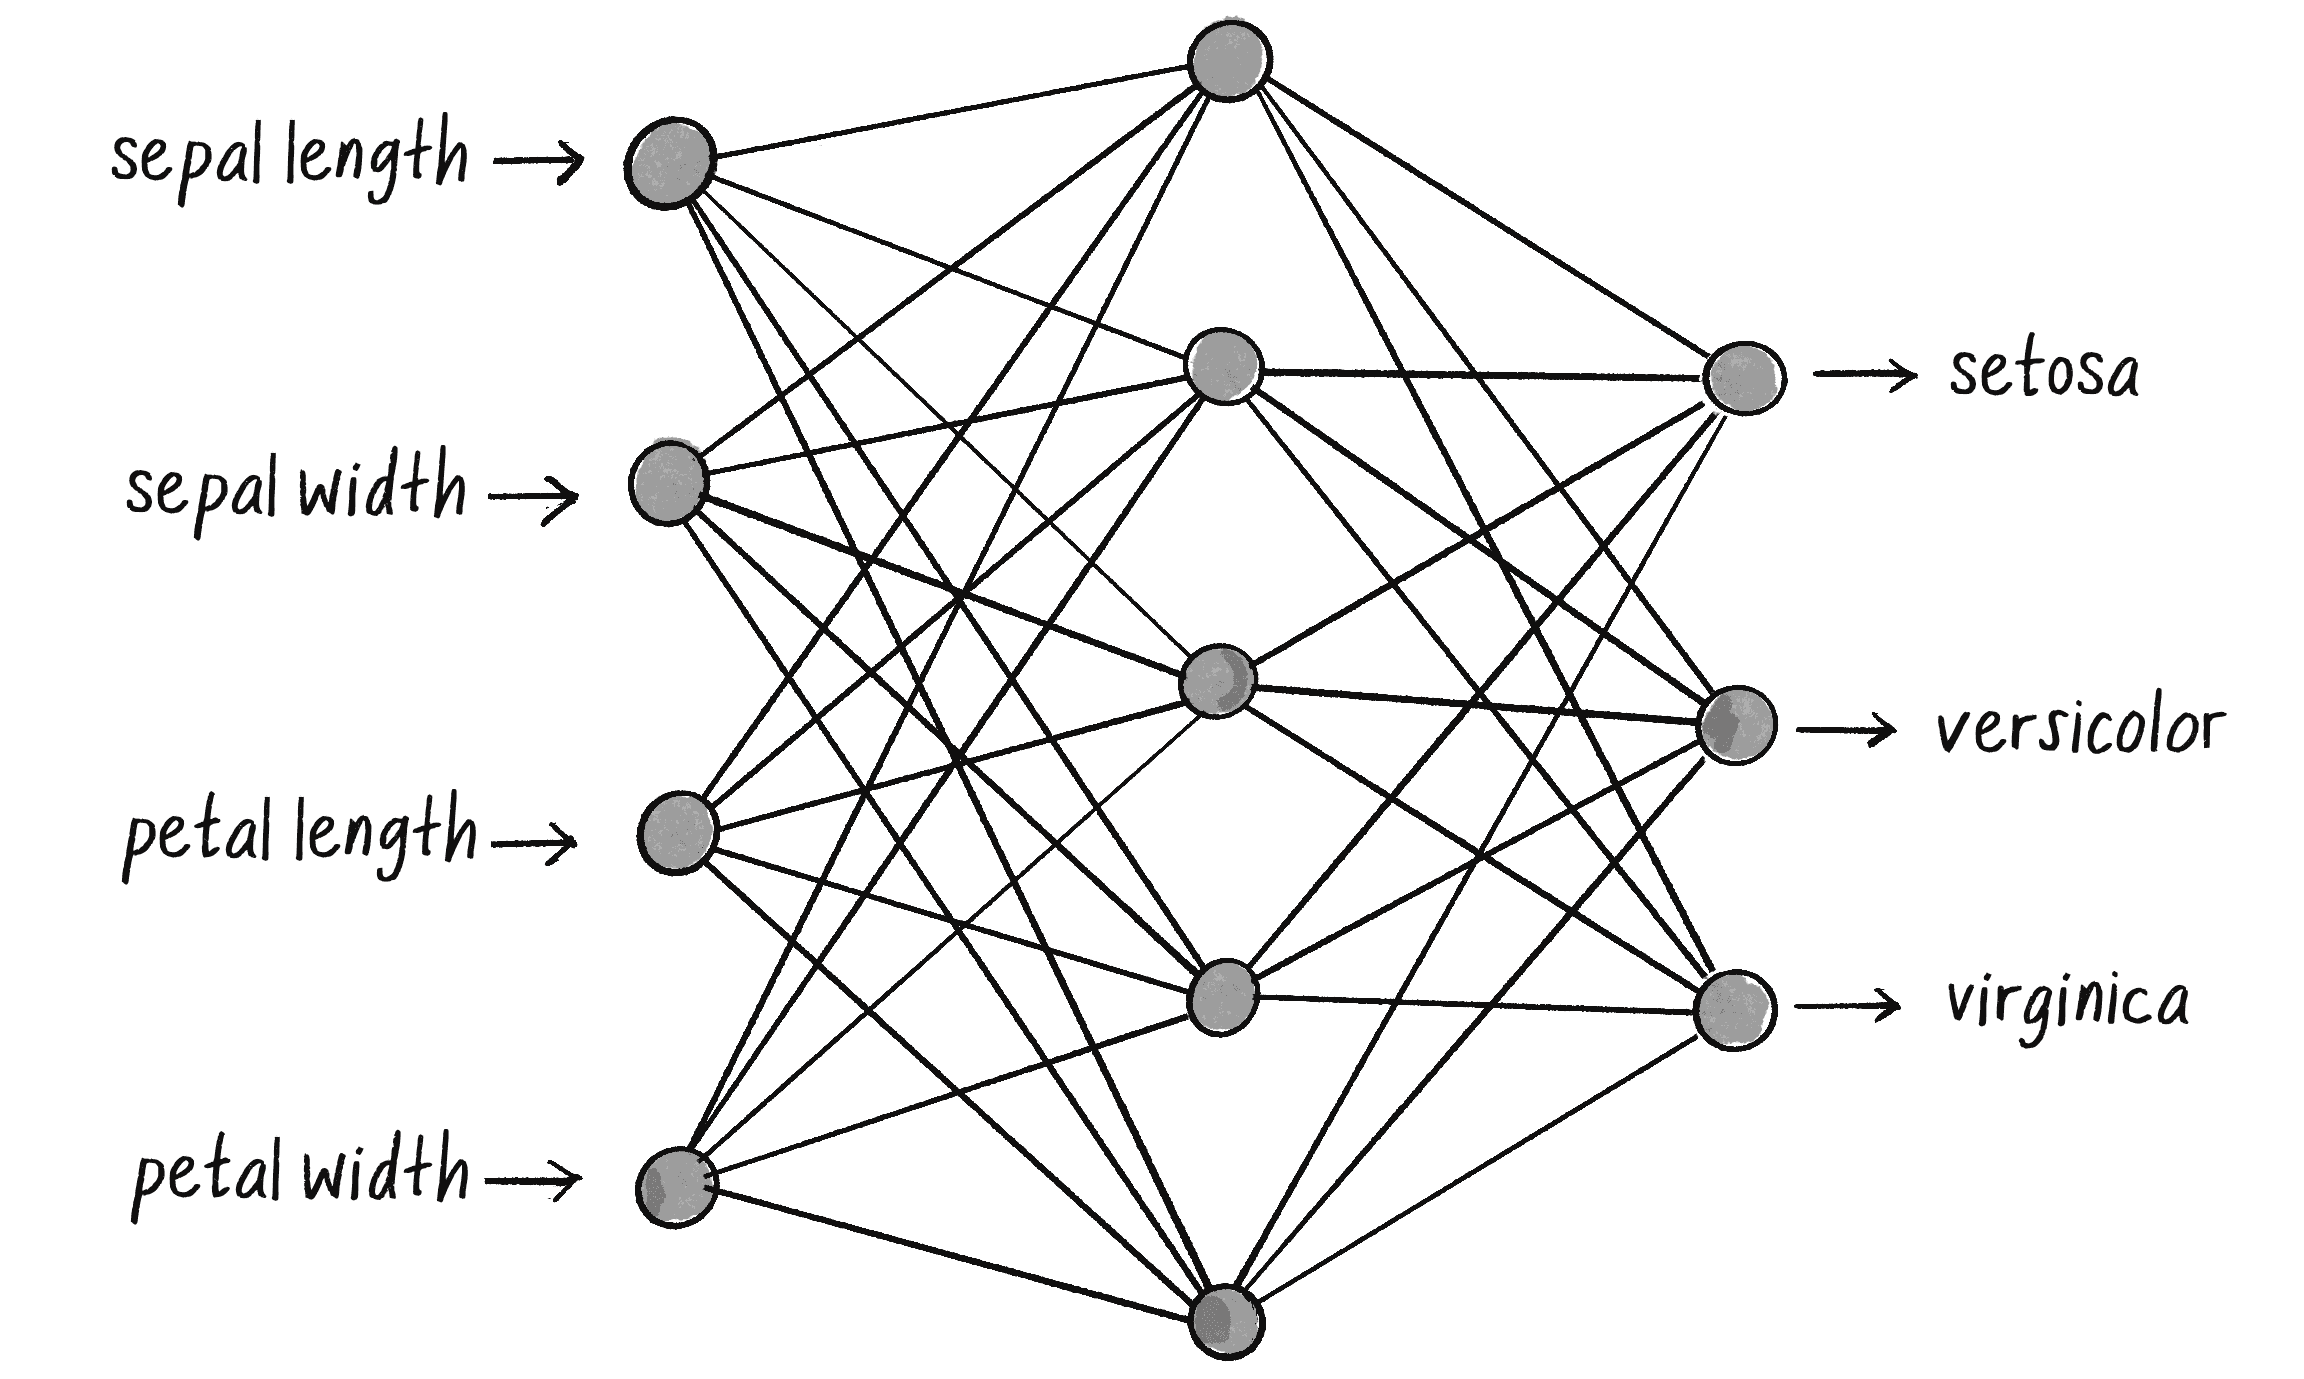 Figure 10.18: A possible network architecture for iris classification